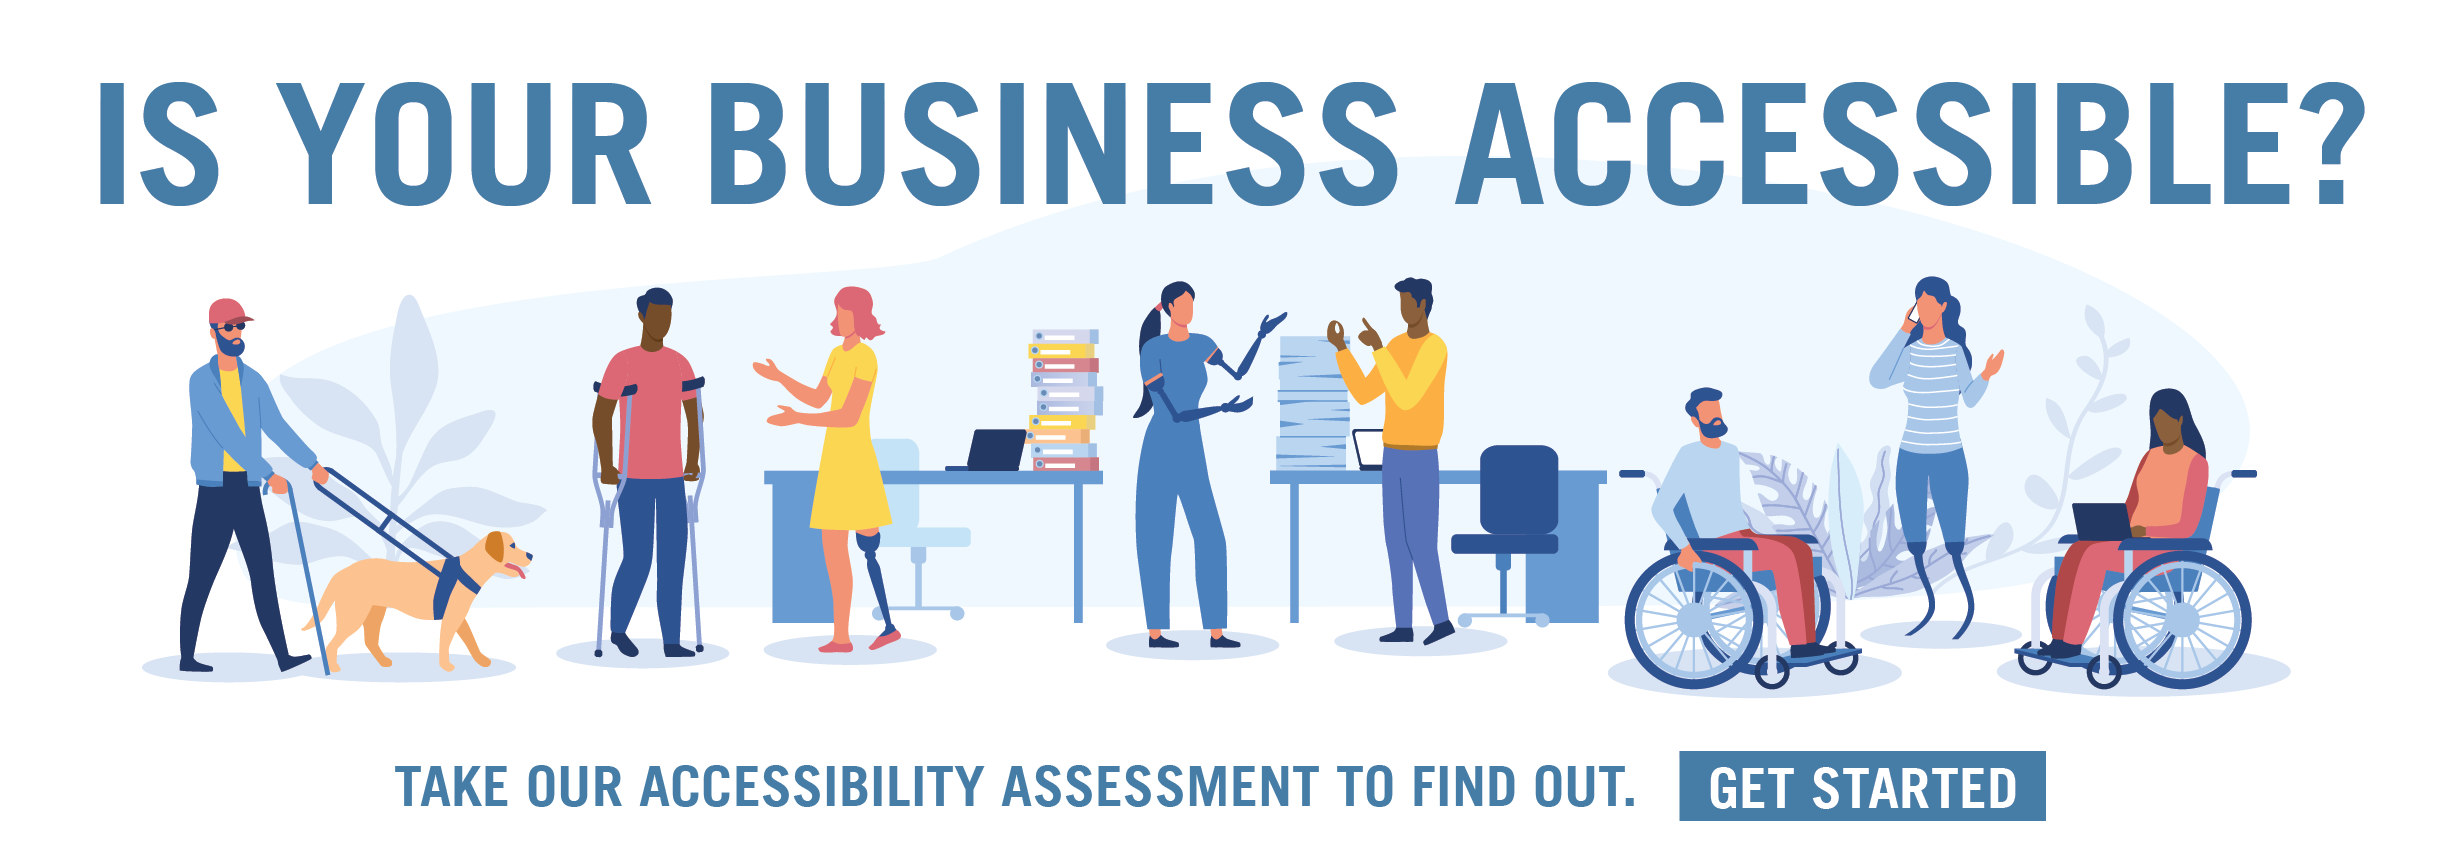 Is your business accessible? Take our accessibility assessment by clicking here, to find out.